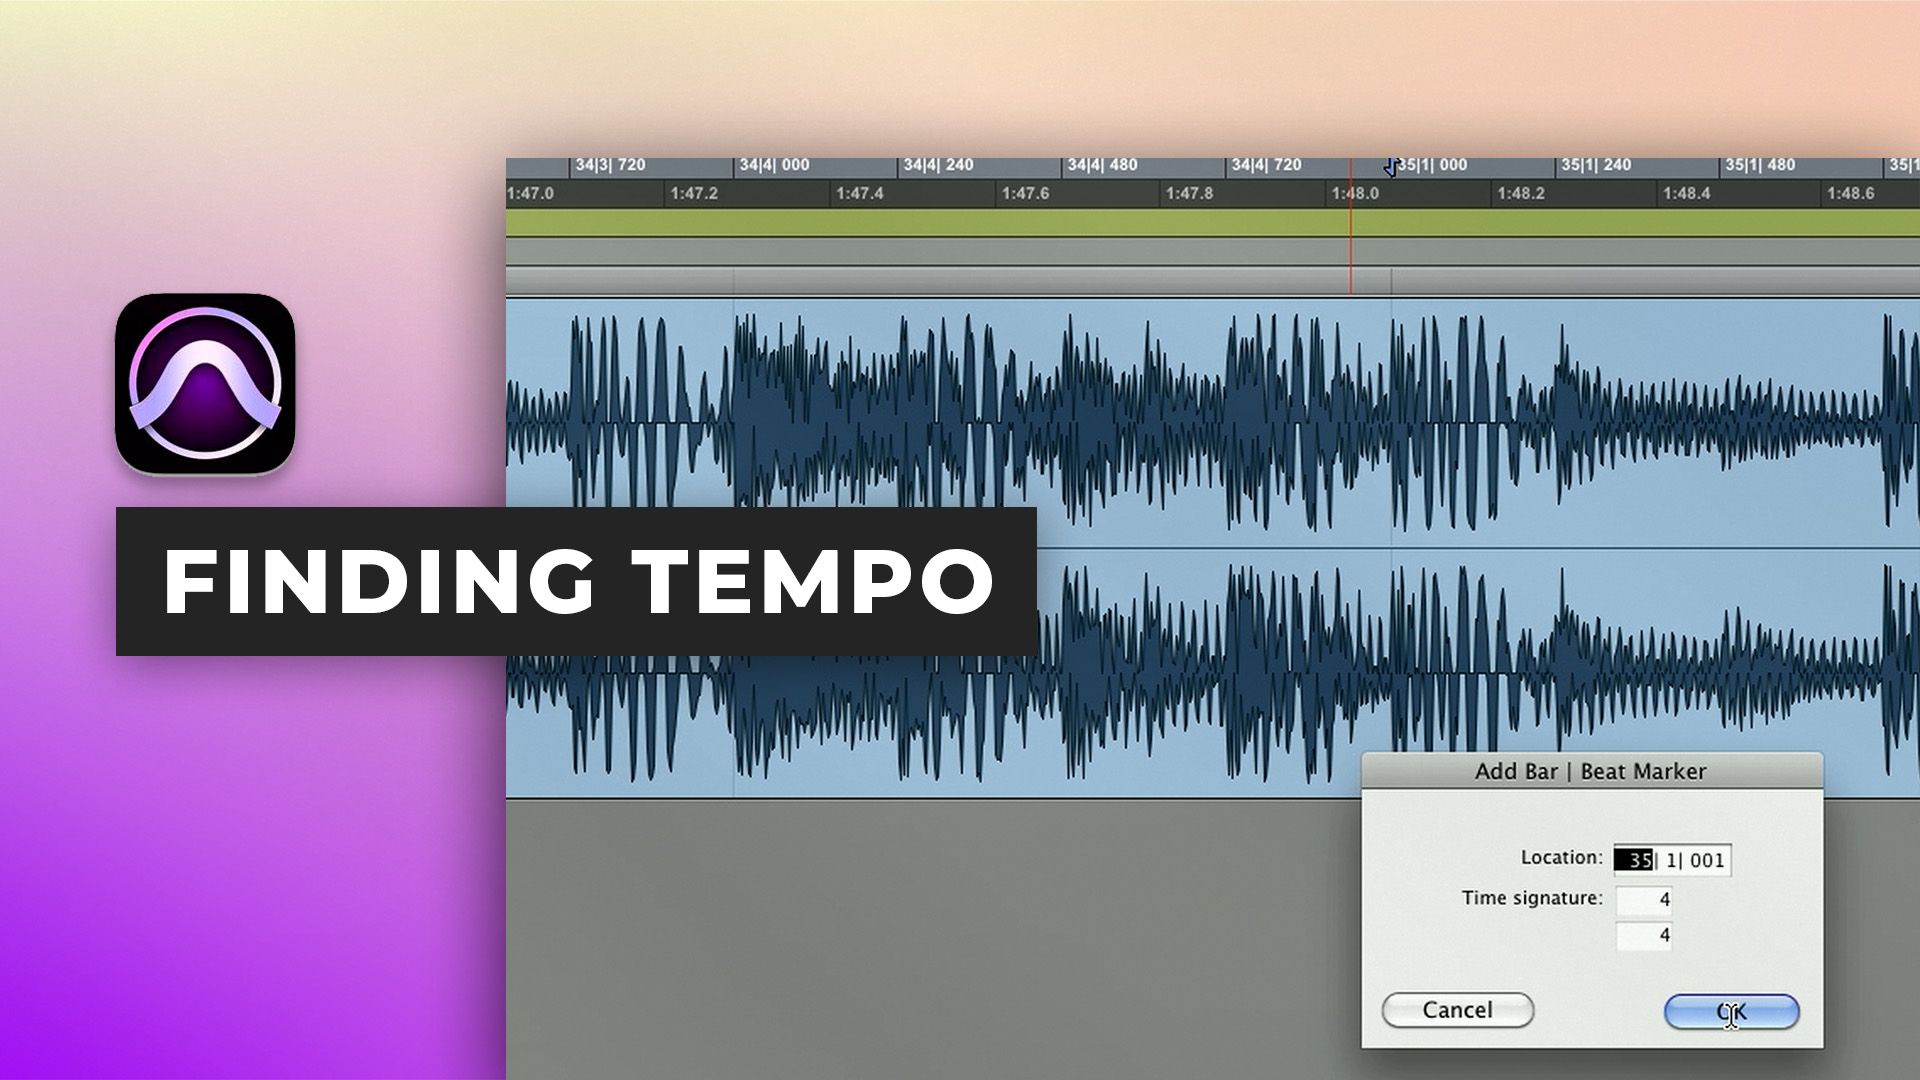 Finding tempo in Pro Tools